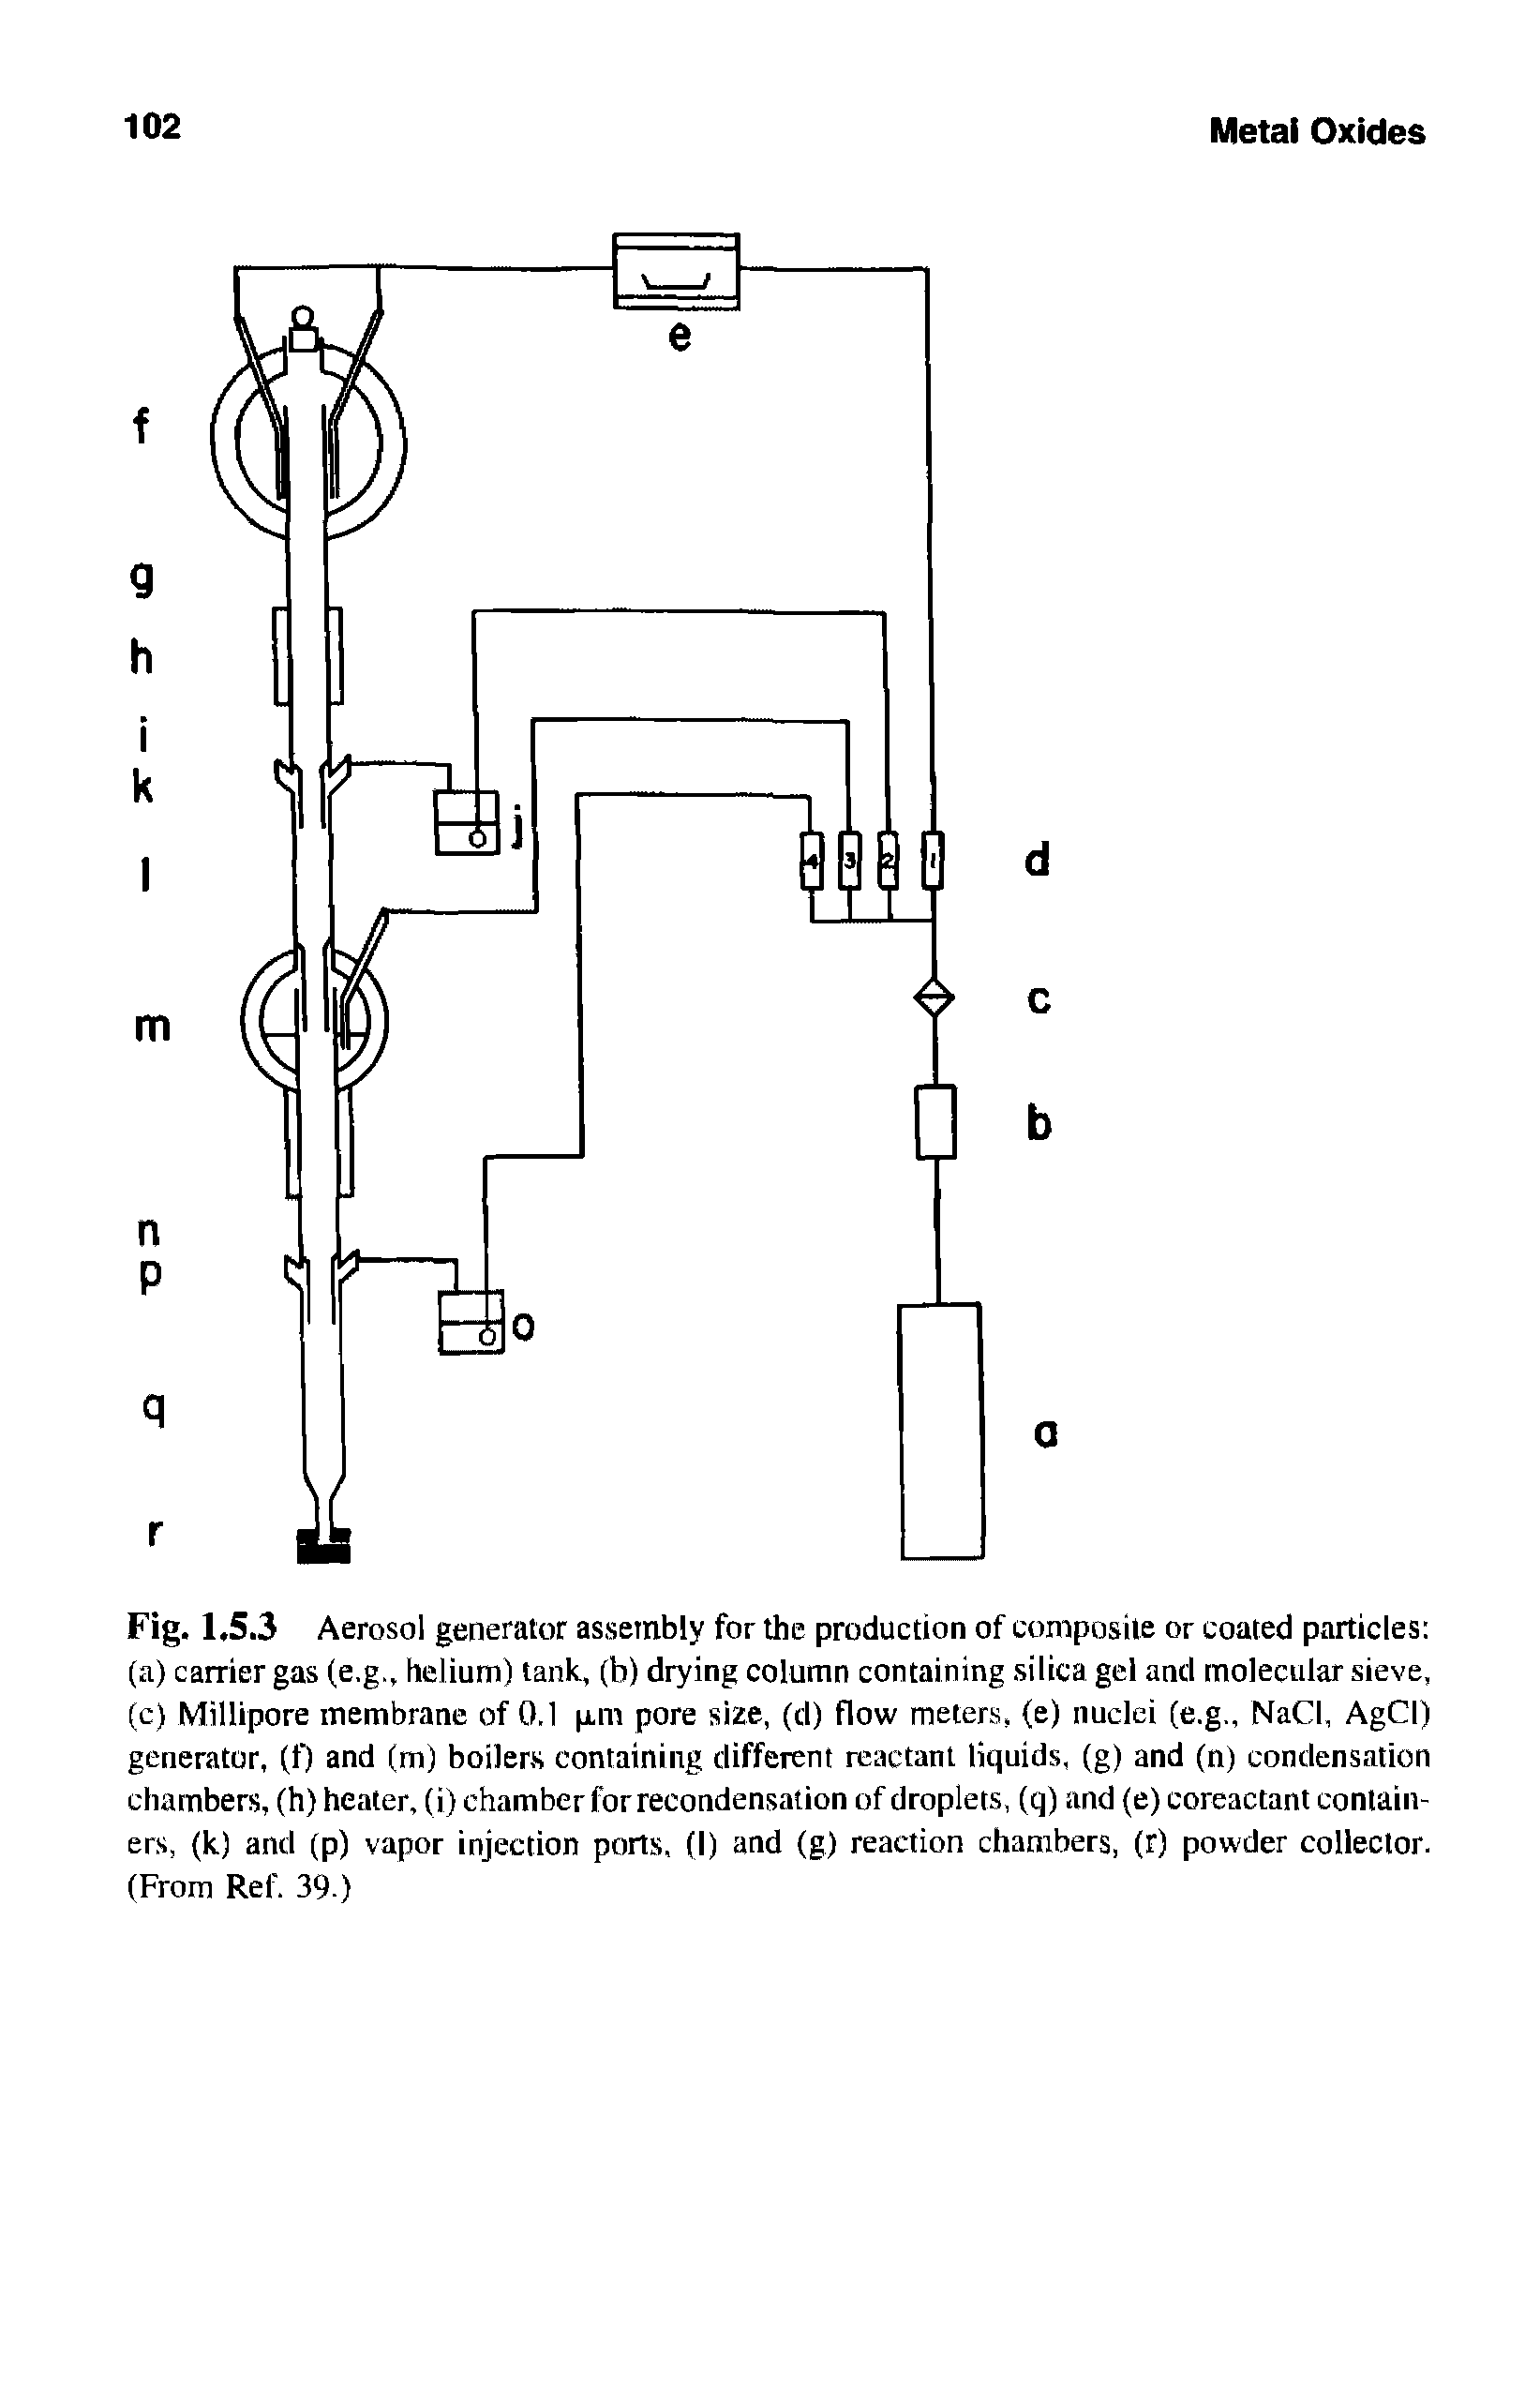 Fig. 1.5.3 Aerosol generator assembly for the production of composite or coated particles (a) carrier gas (e.g., helium) tank, (b) drying column containing silica gel and molecular sieve, (c) Millipore membrane of 0.1 p.m pore size, (d) flow meters, (e) nuclei (e.g., NaCI, AgCI) generator, (f) and (m) boilers containing different reactant liquids, (g) and (n) condensation chambers, (h) heater, (i) chamber for recondensation of droplets, (q) and (e) coreactant containers, (k) and (p) vapor injection ports, (I) and (g) reaction chambers, (r) powder collector. (From Ref. 39.)...